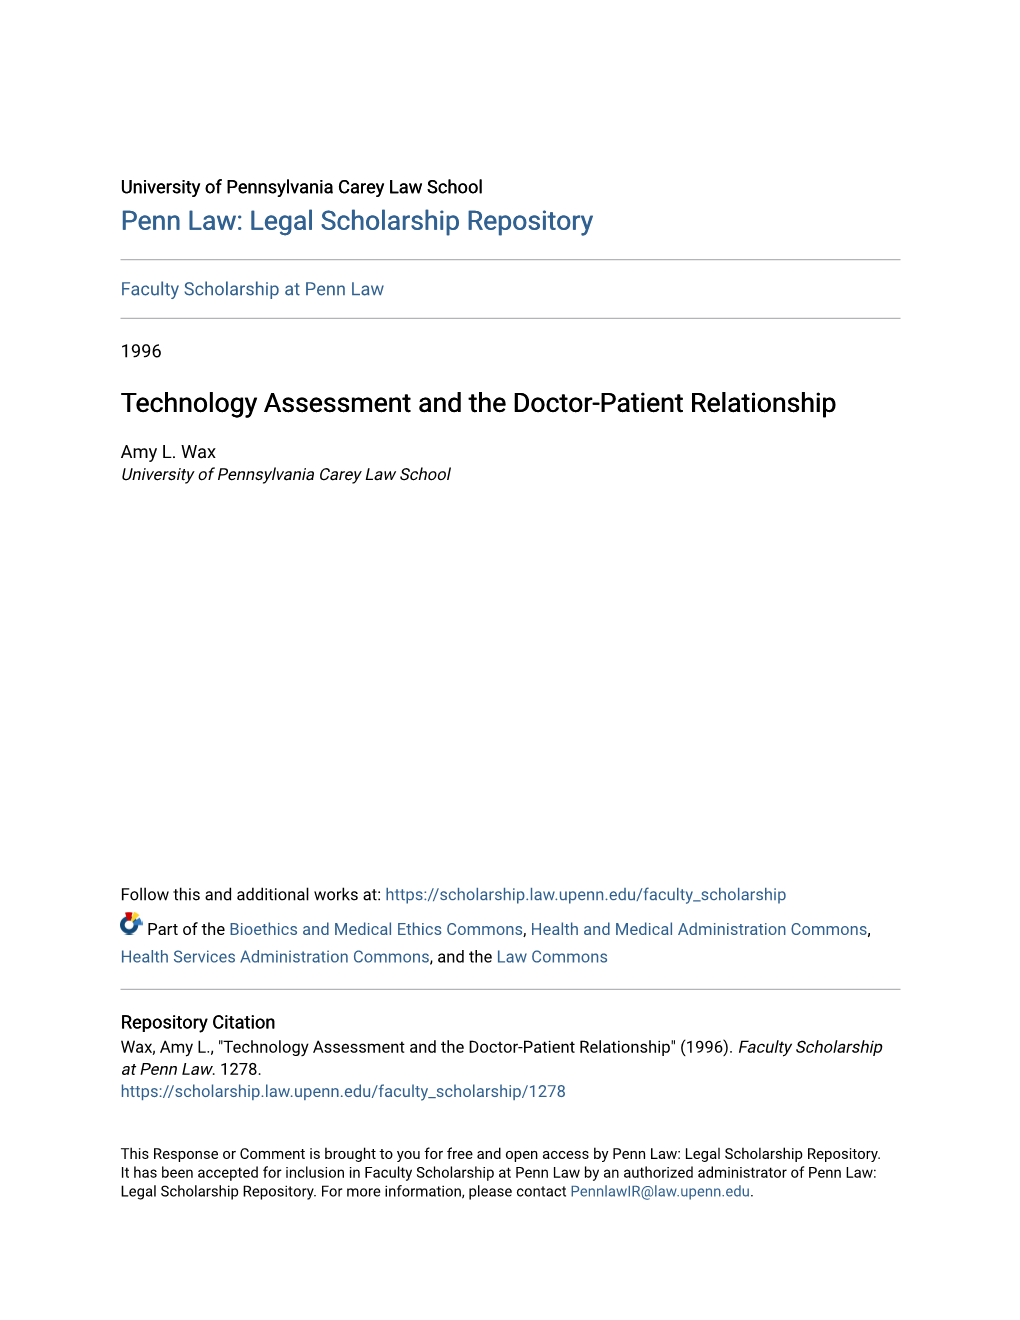 Technology Assessment and the Doctor-Patient Relationship